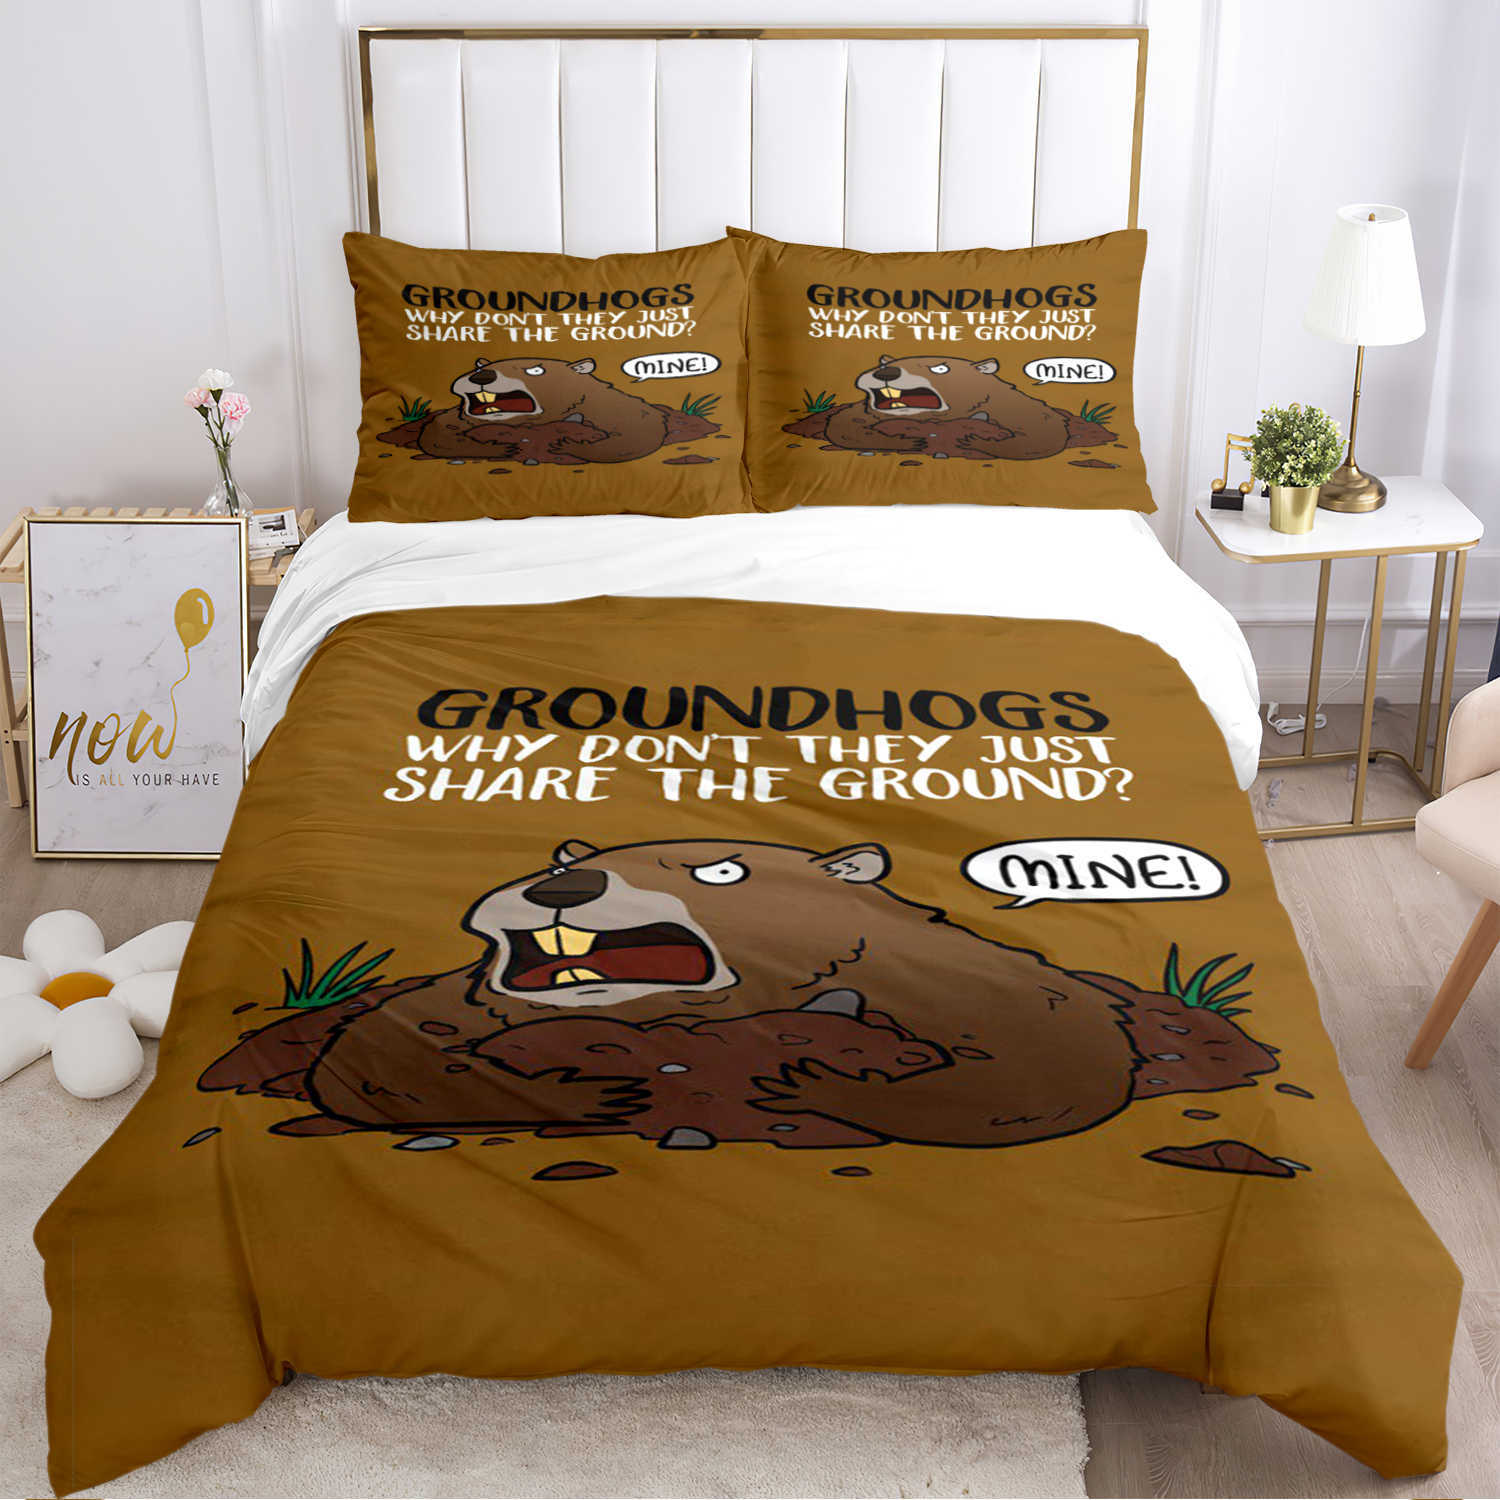 capybara club anime Duvet Cover Kawaii Comforter Bedding set Soft Quilt Cover and cases for Teens Single/Double/Queen/King